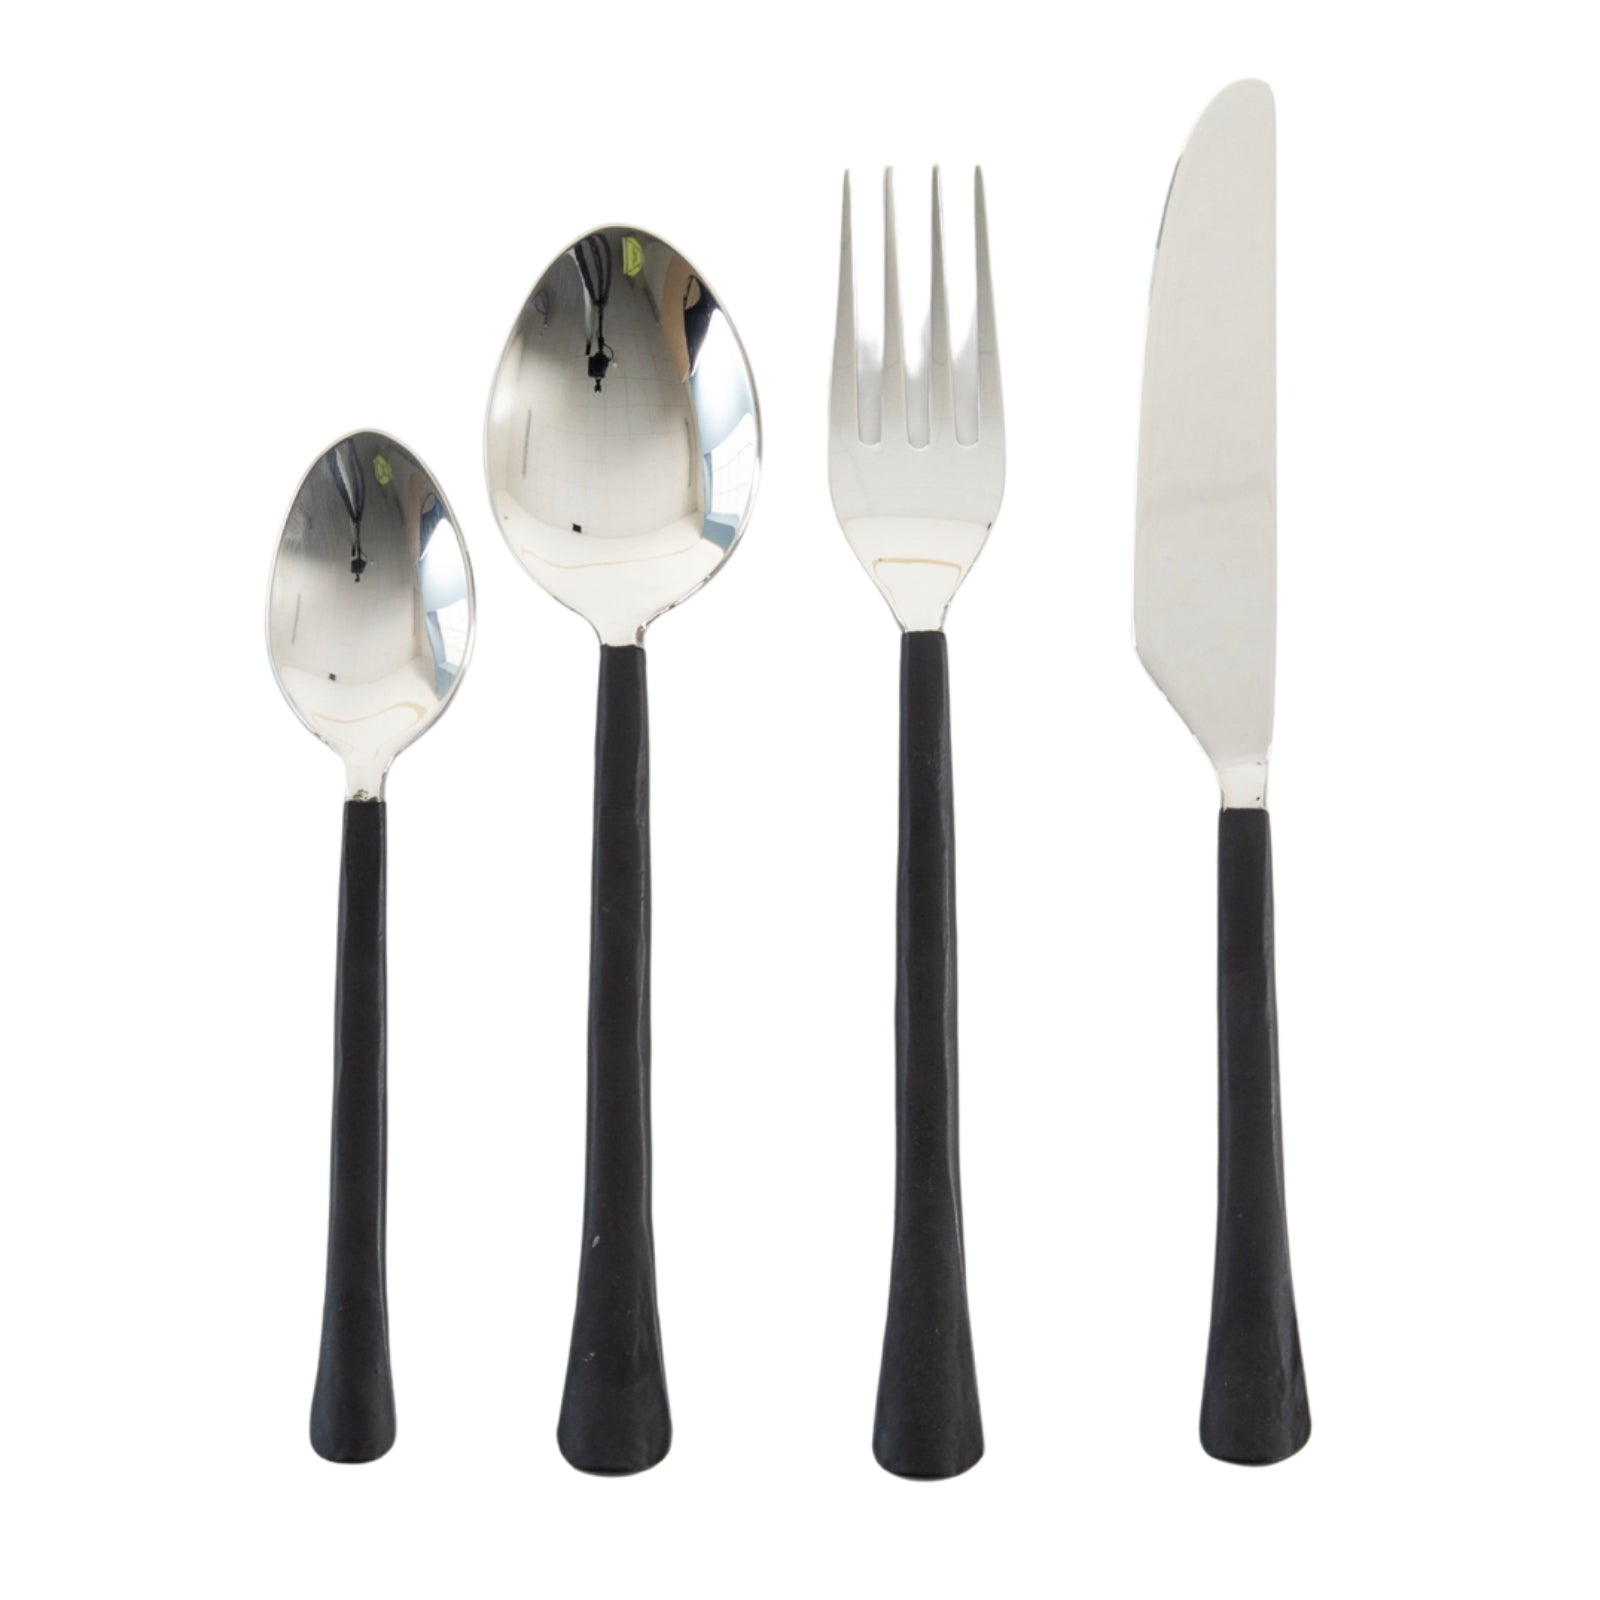 Stainless Steel with Black Handles Cutlery Set - 16 Piece - The Farthing